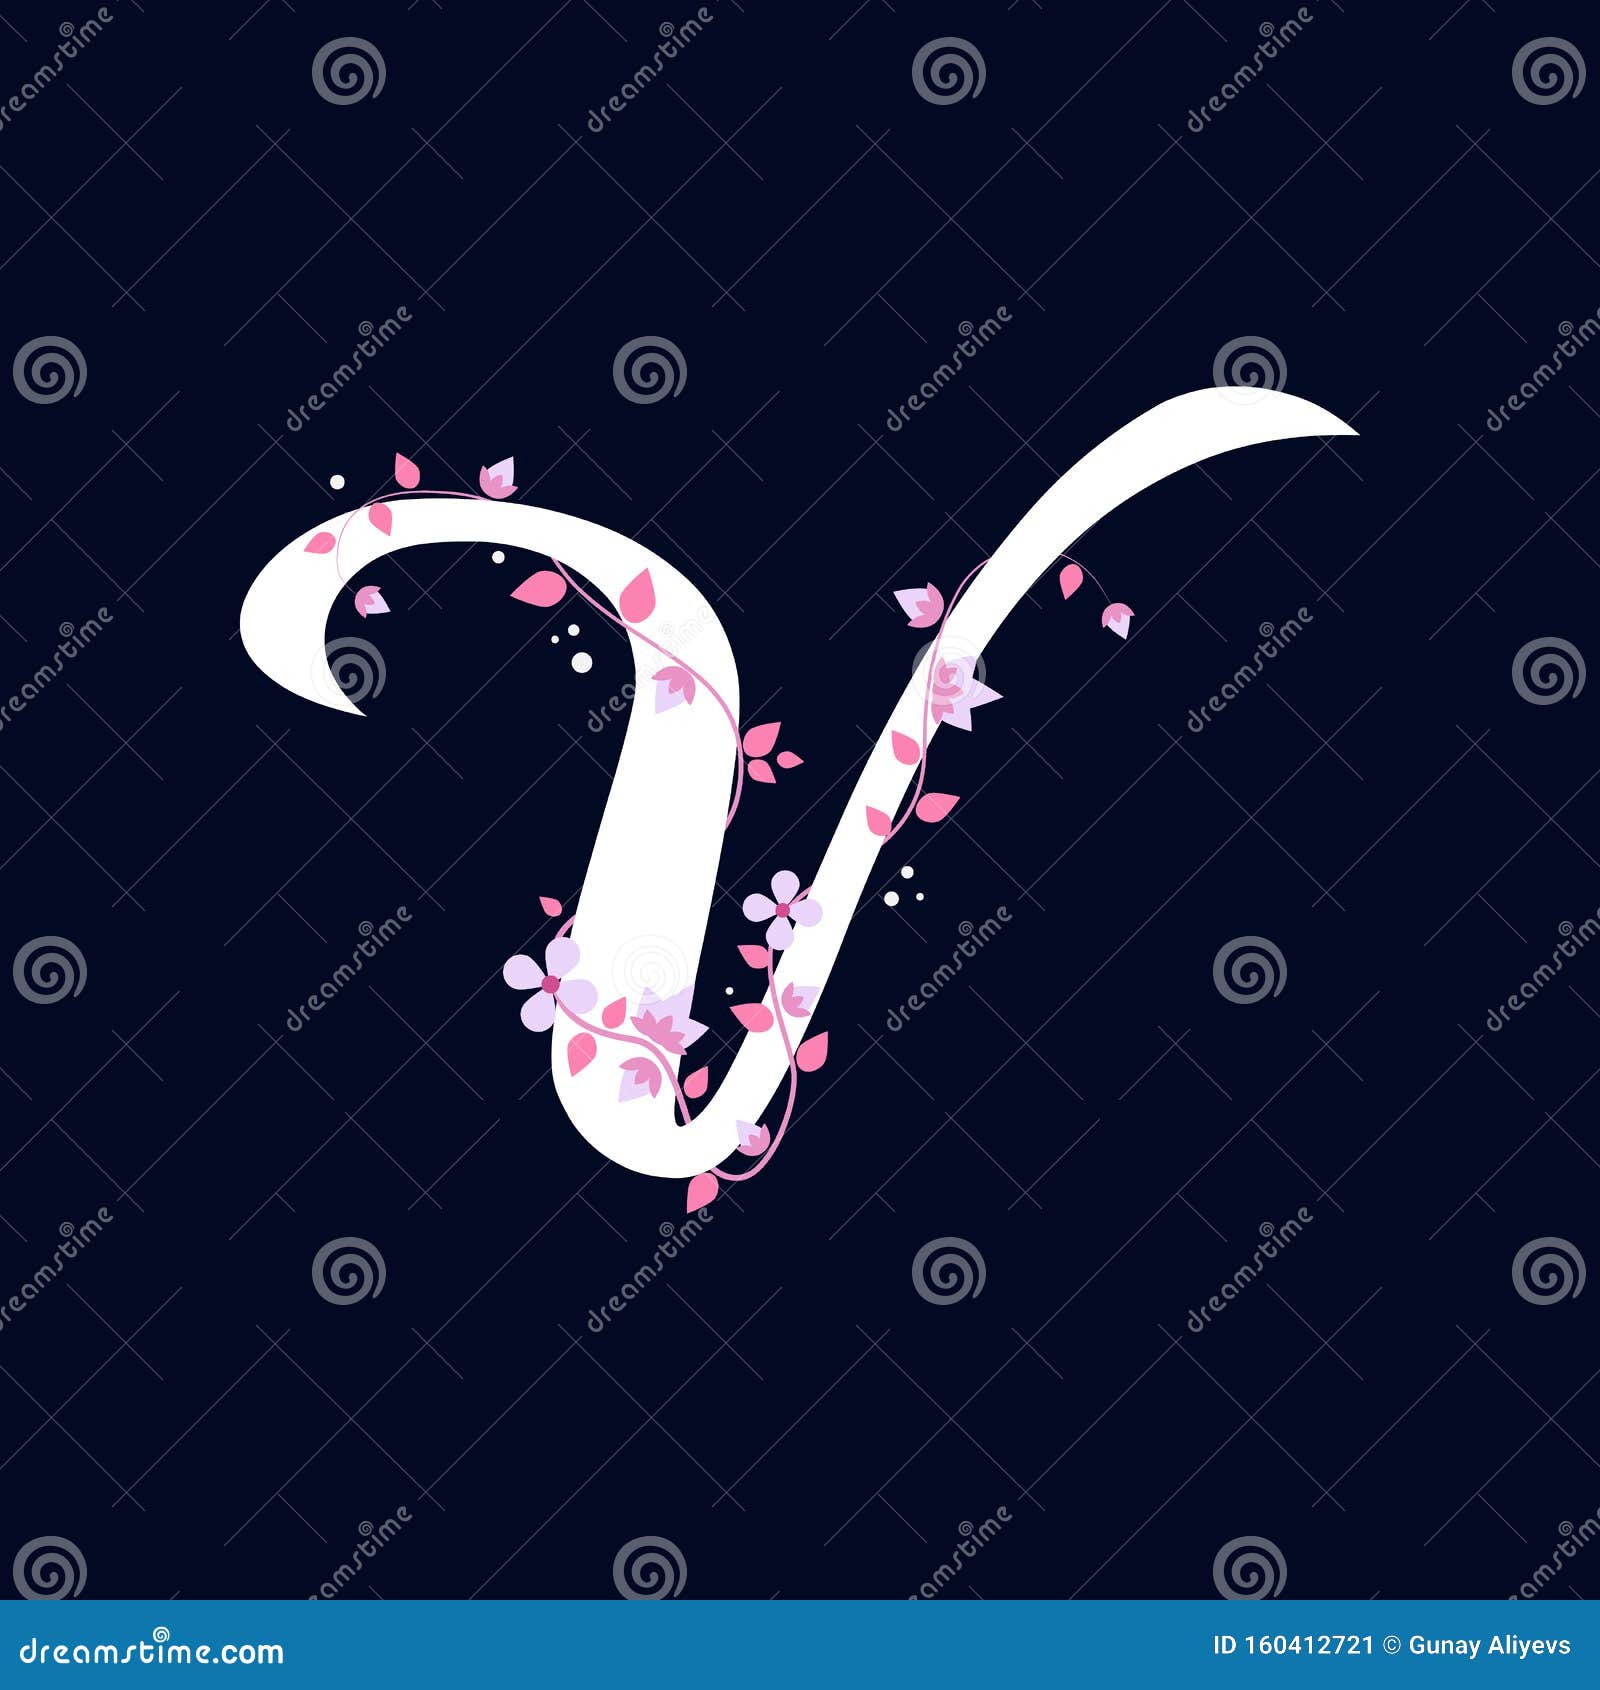 White V Letter With Flowers Alphabet Illustration On Dark Blue Stock Illustration Illustration Of Abstract Flower